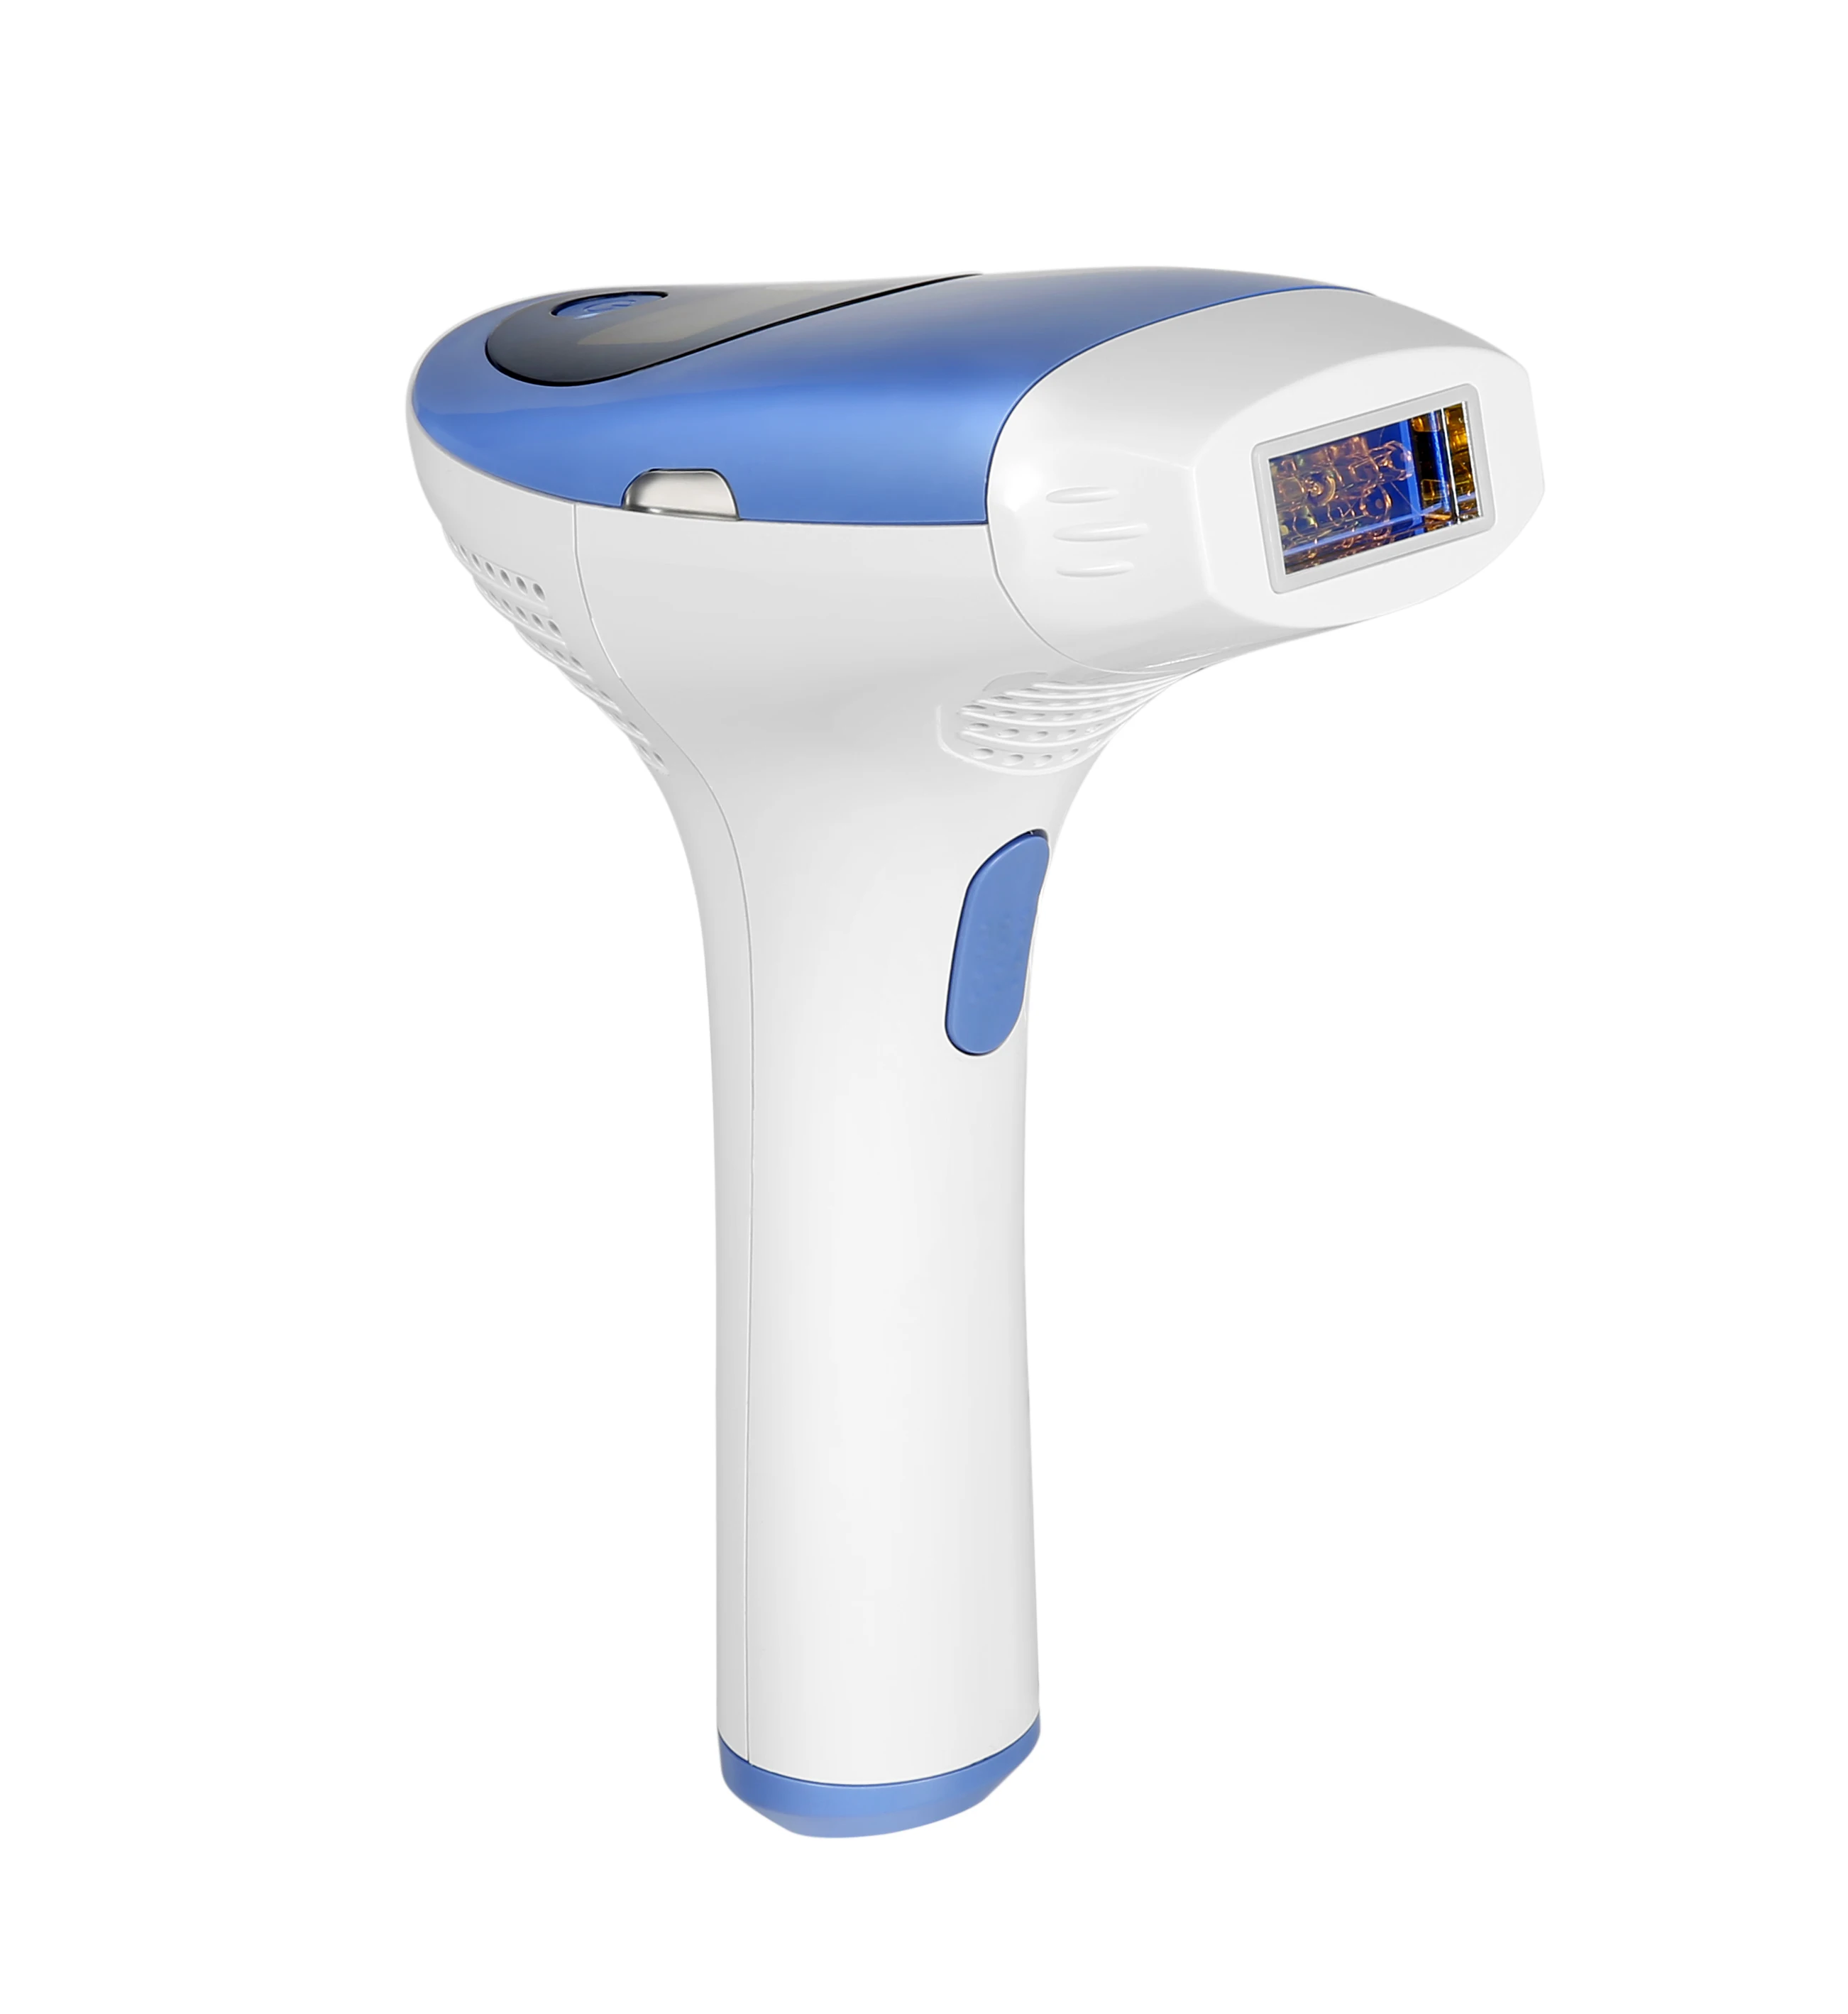 MLAY T3 Mlay 3 In 1 Multifunction Ipl Home Hair Remover Laser Free Shipping For Whole Body